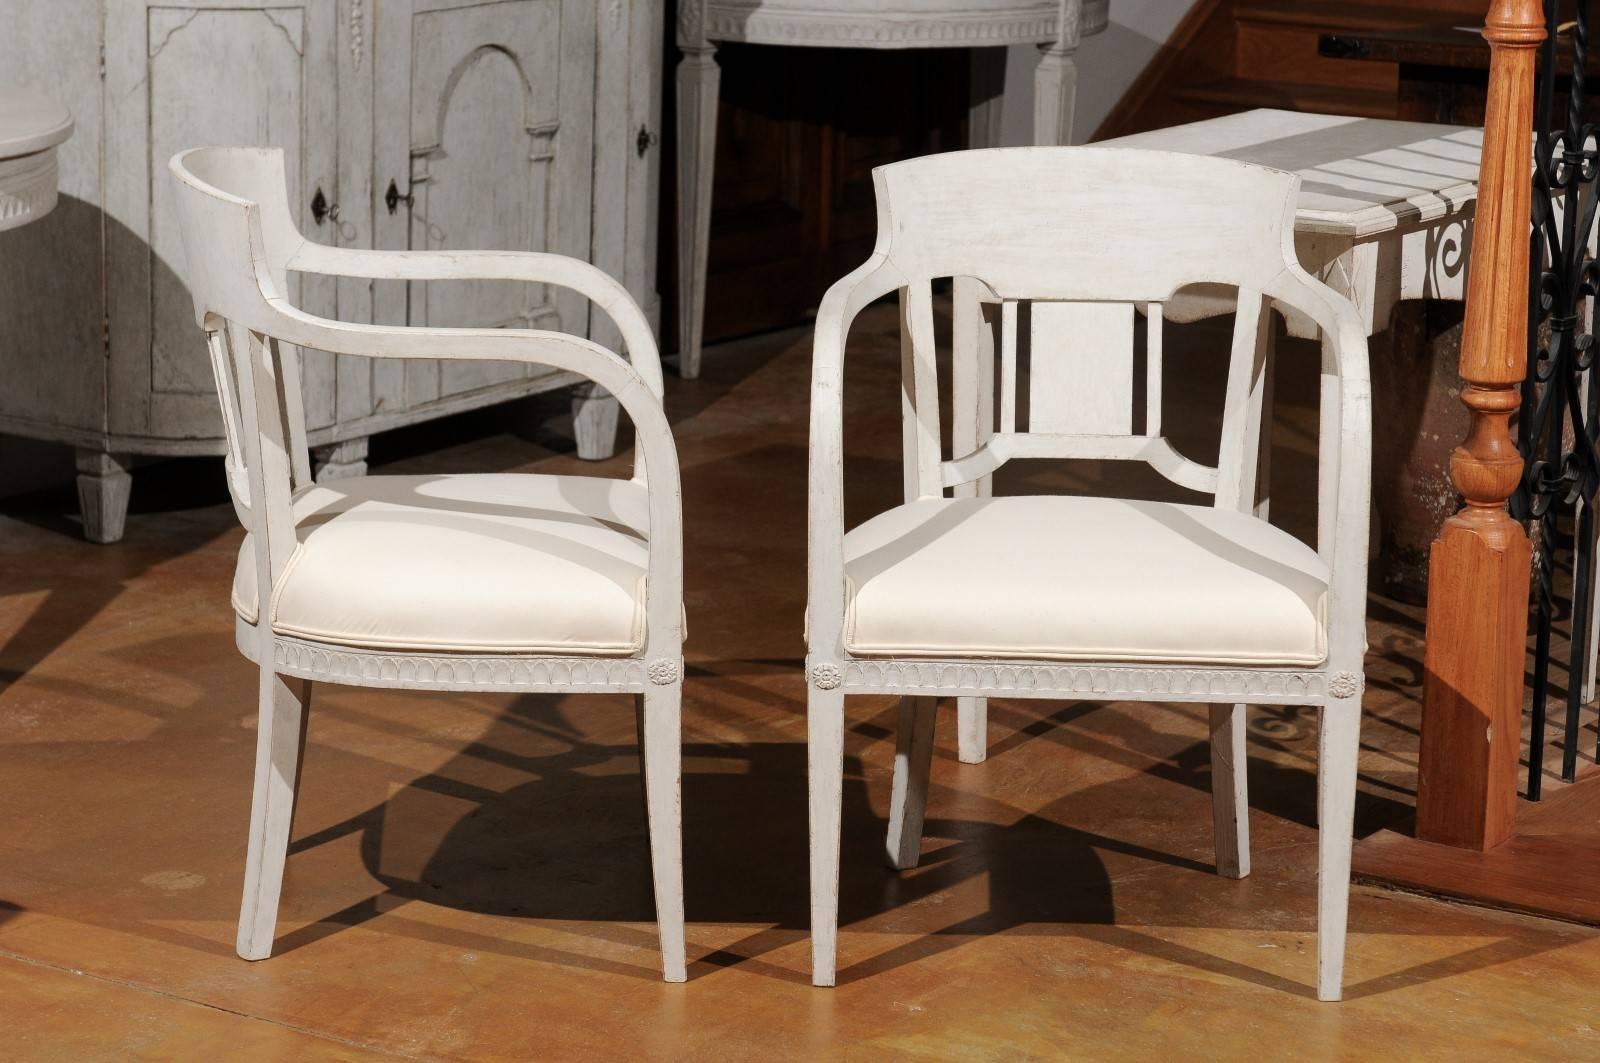 Pair of 1870s Swedish Painted Wood Neoclassical Style Upholstered Armchairs For Sale 5